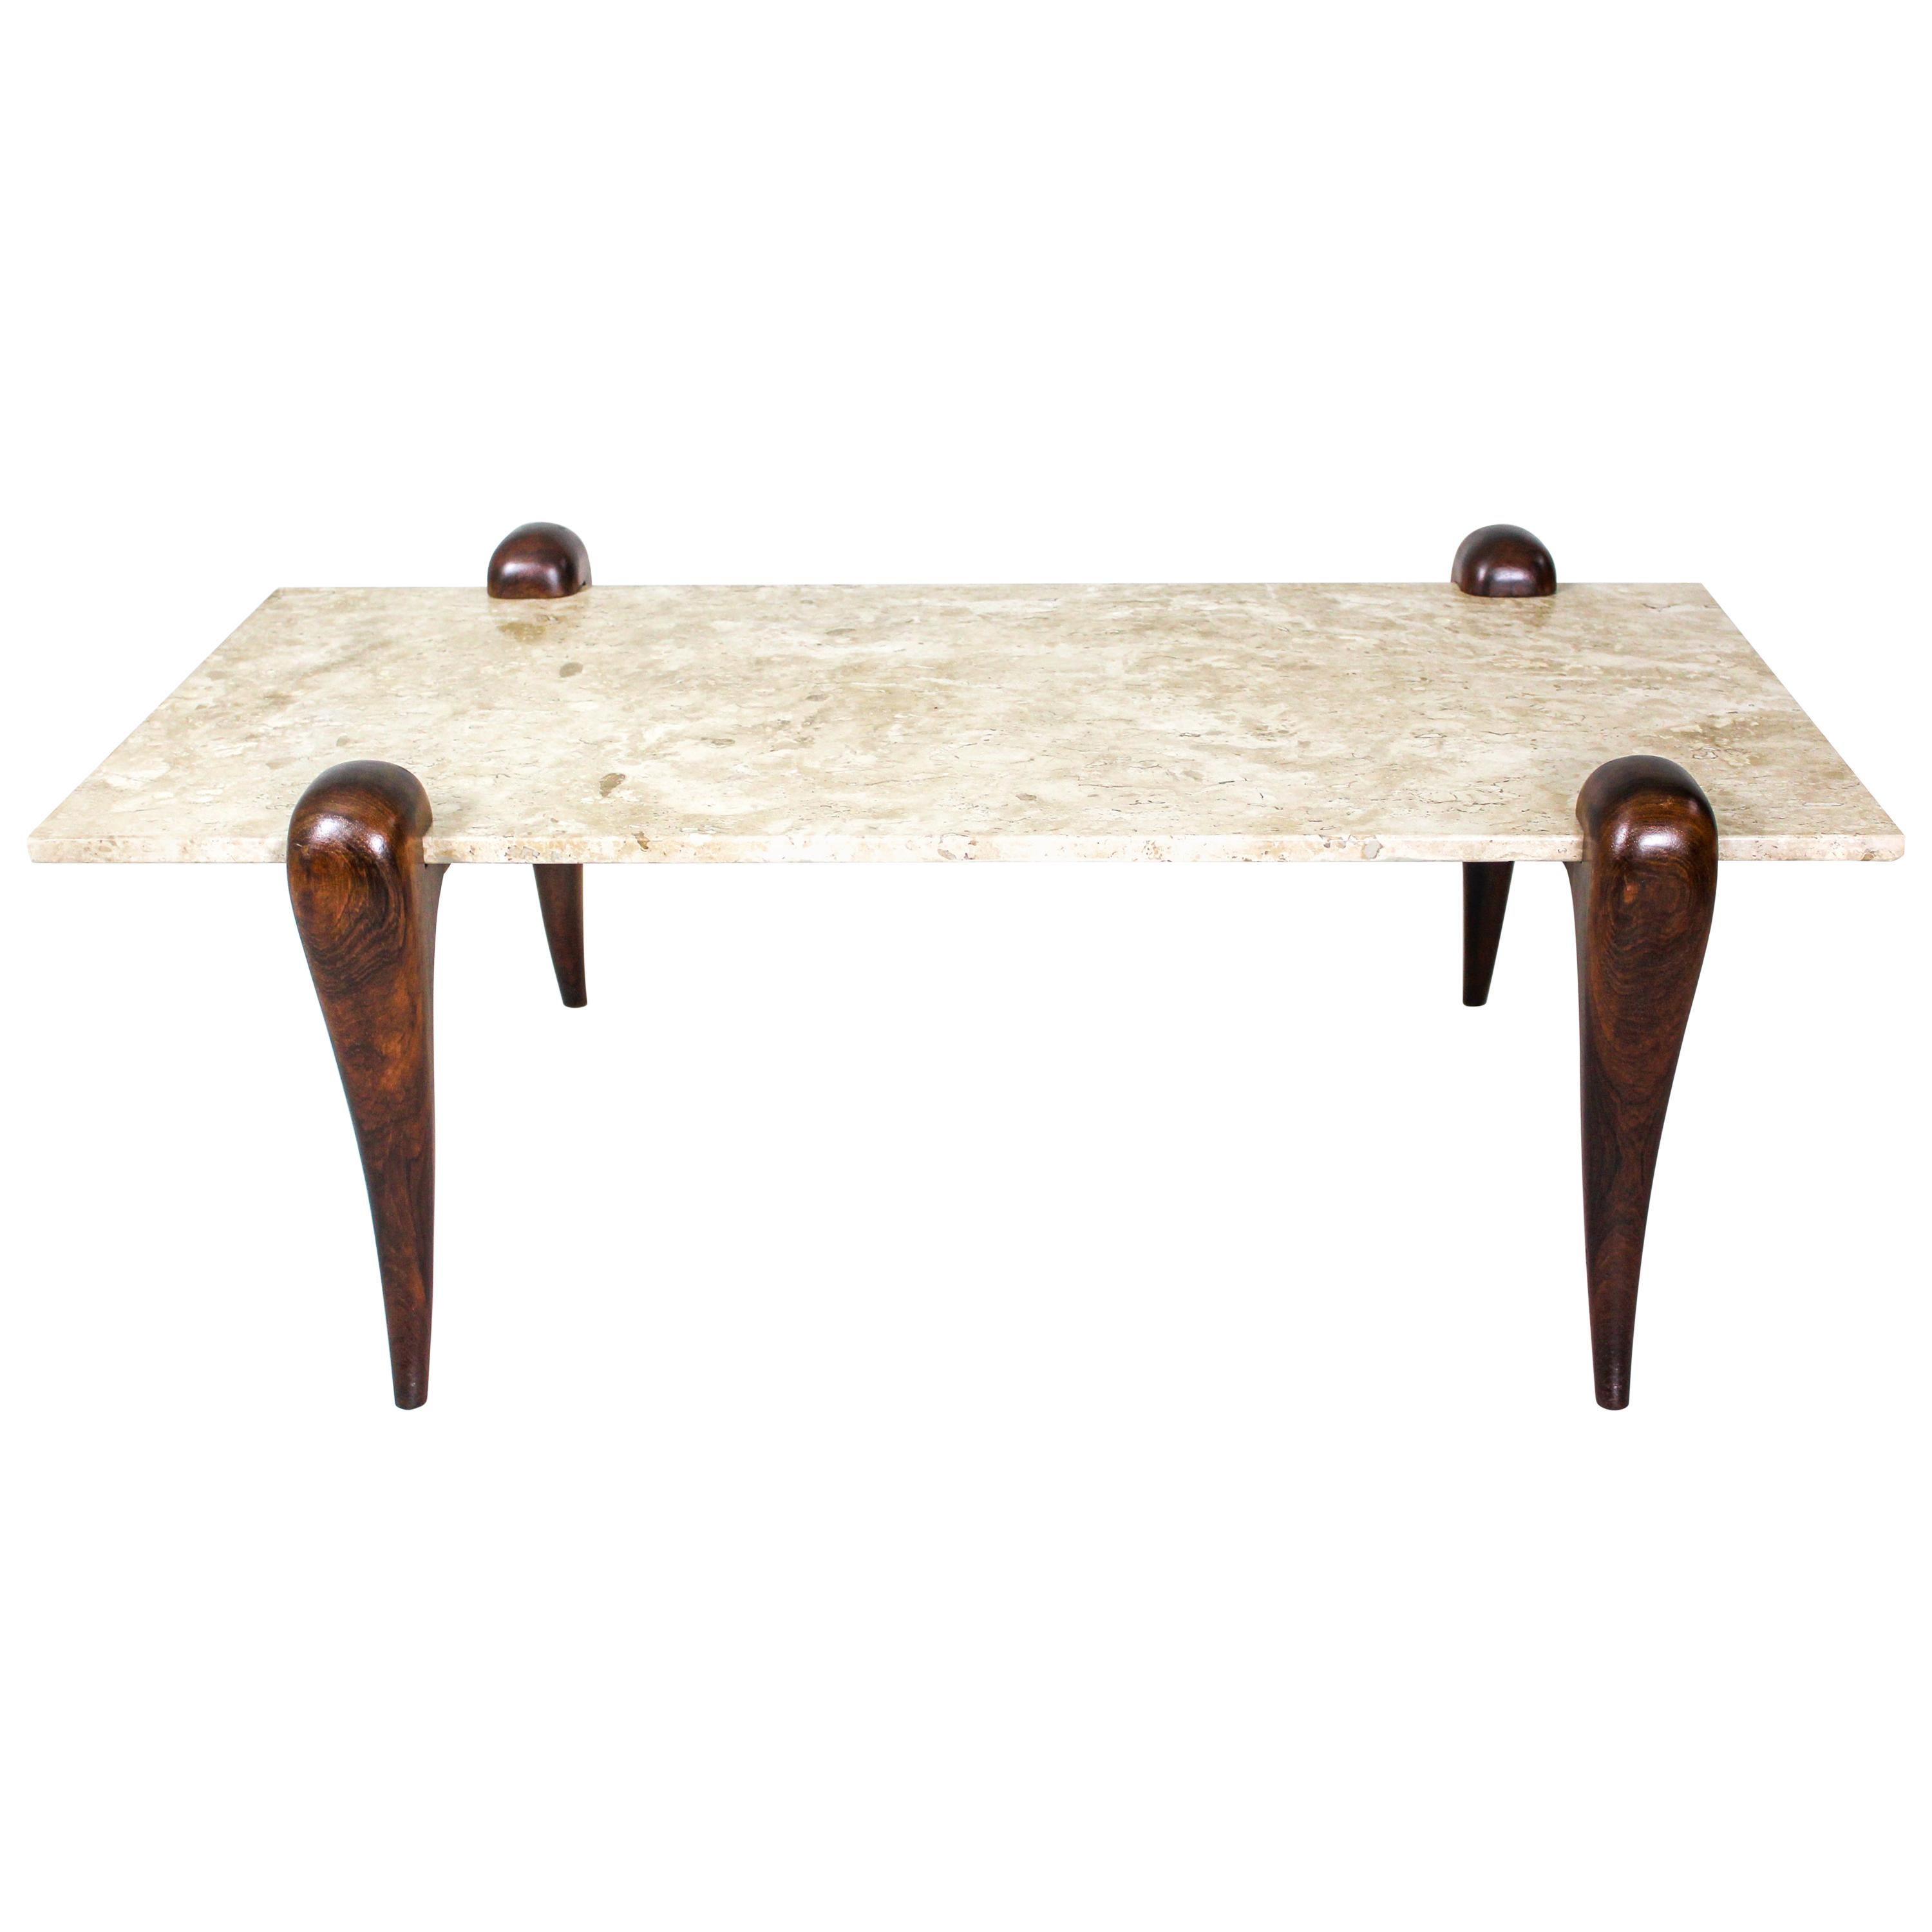 Mid-Century Modern Marble Top Center Table, Brazil, 1950s For Sale